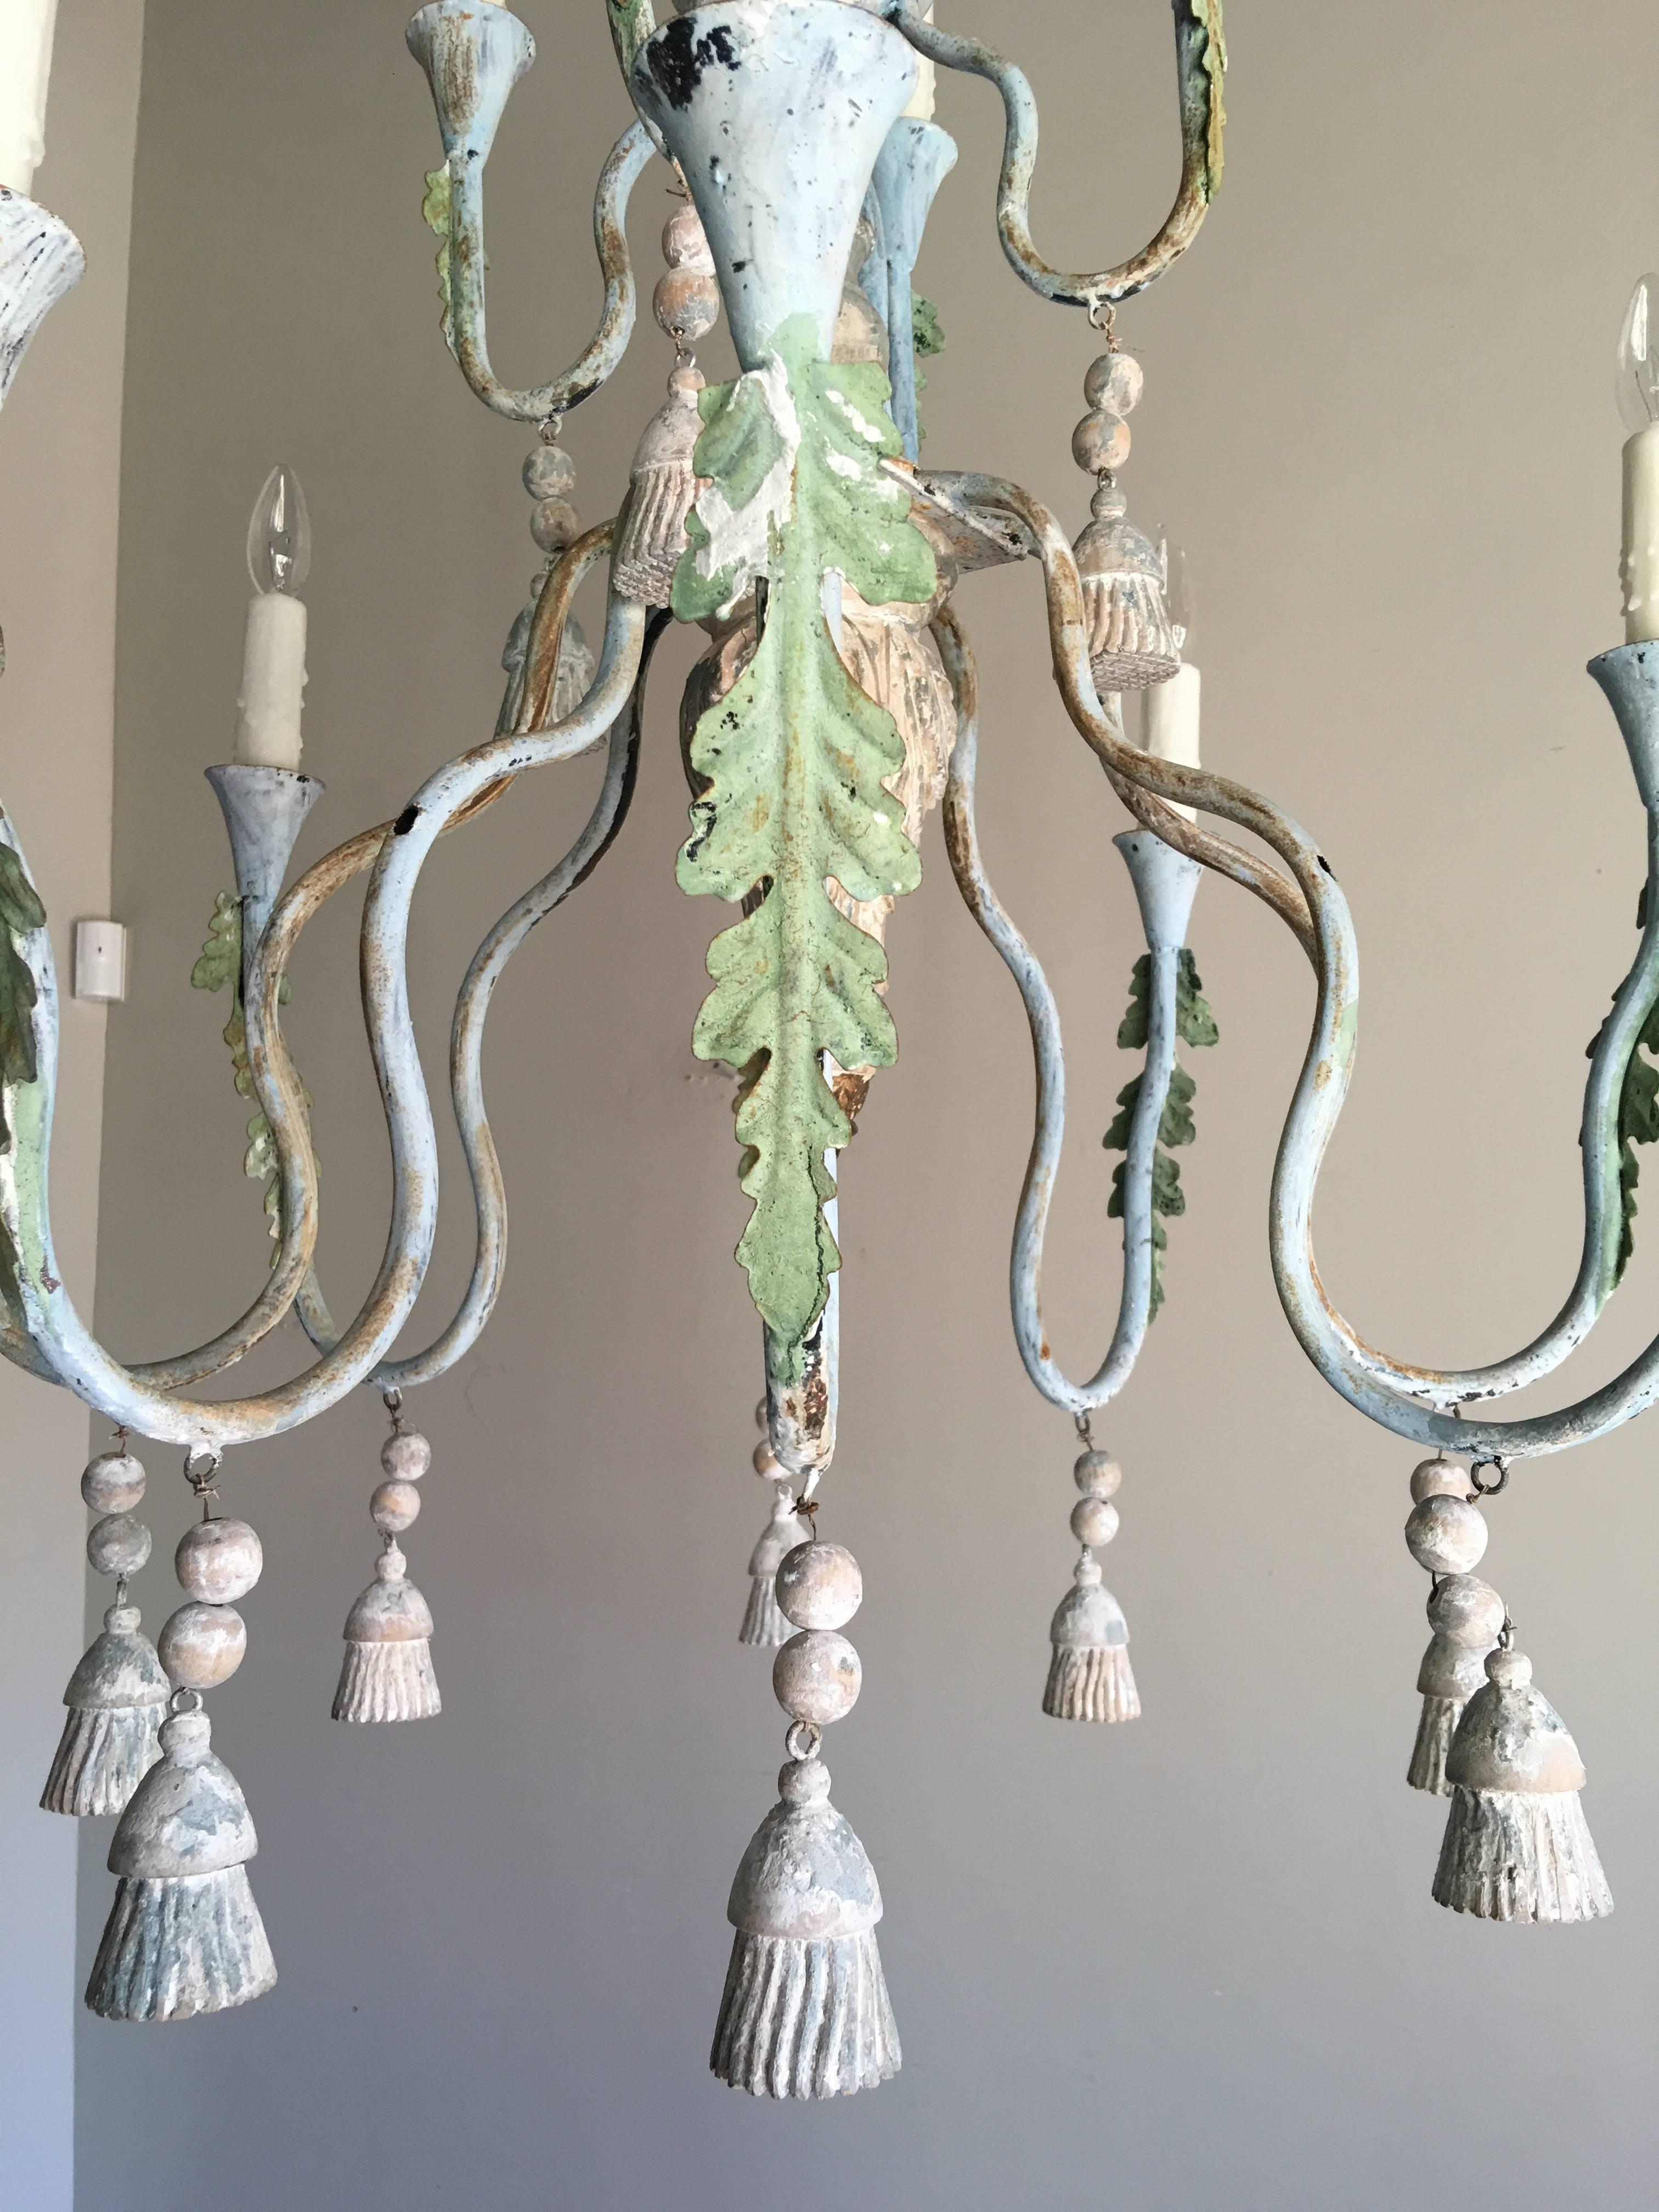 12 light wood and iron painted chandelier with carved wood tassels hanging throughout. This fixture has been newly wired with chain and canopy included. Drip wax candle covers.